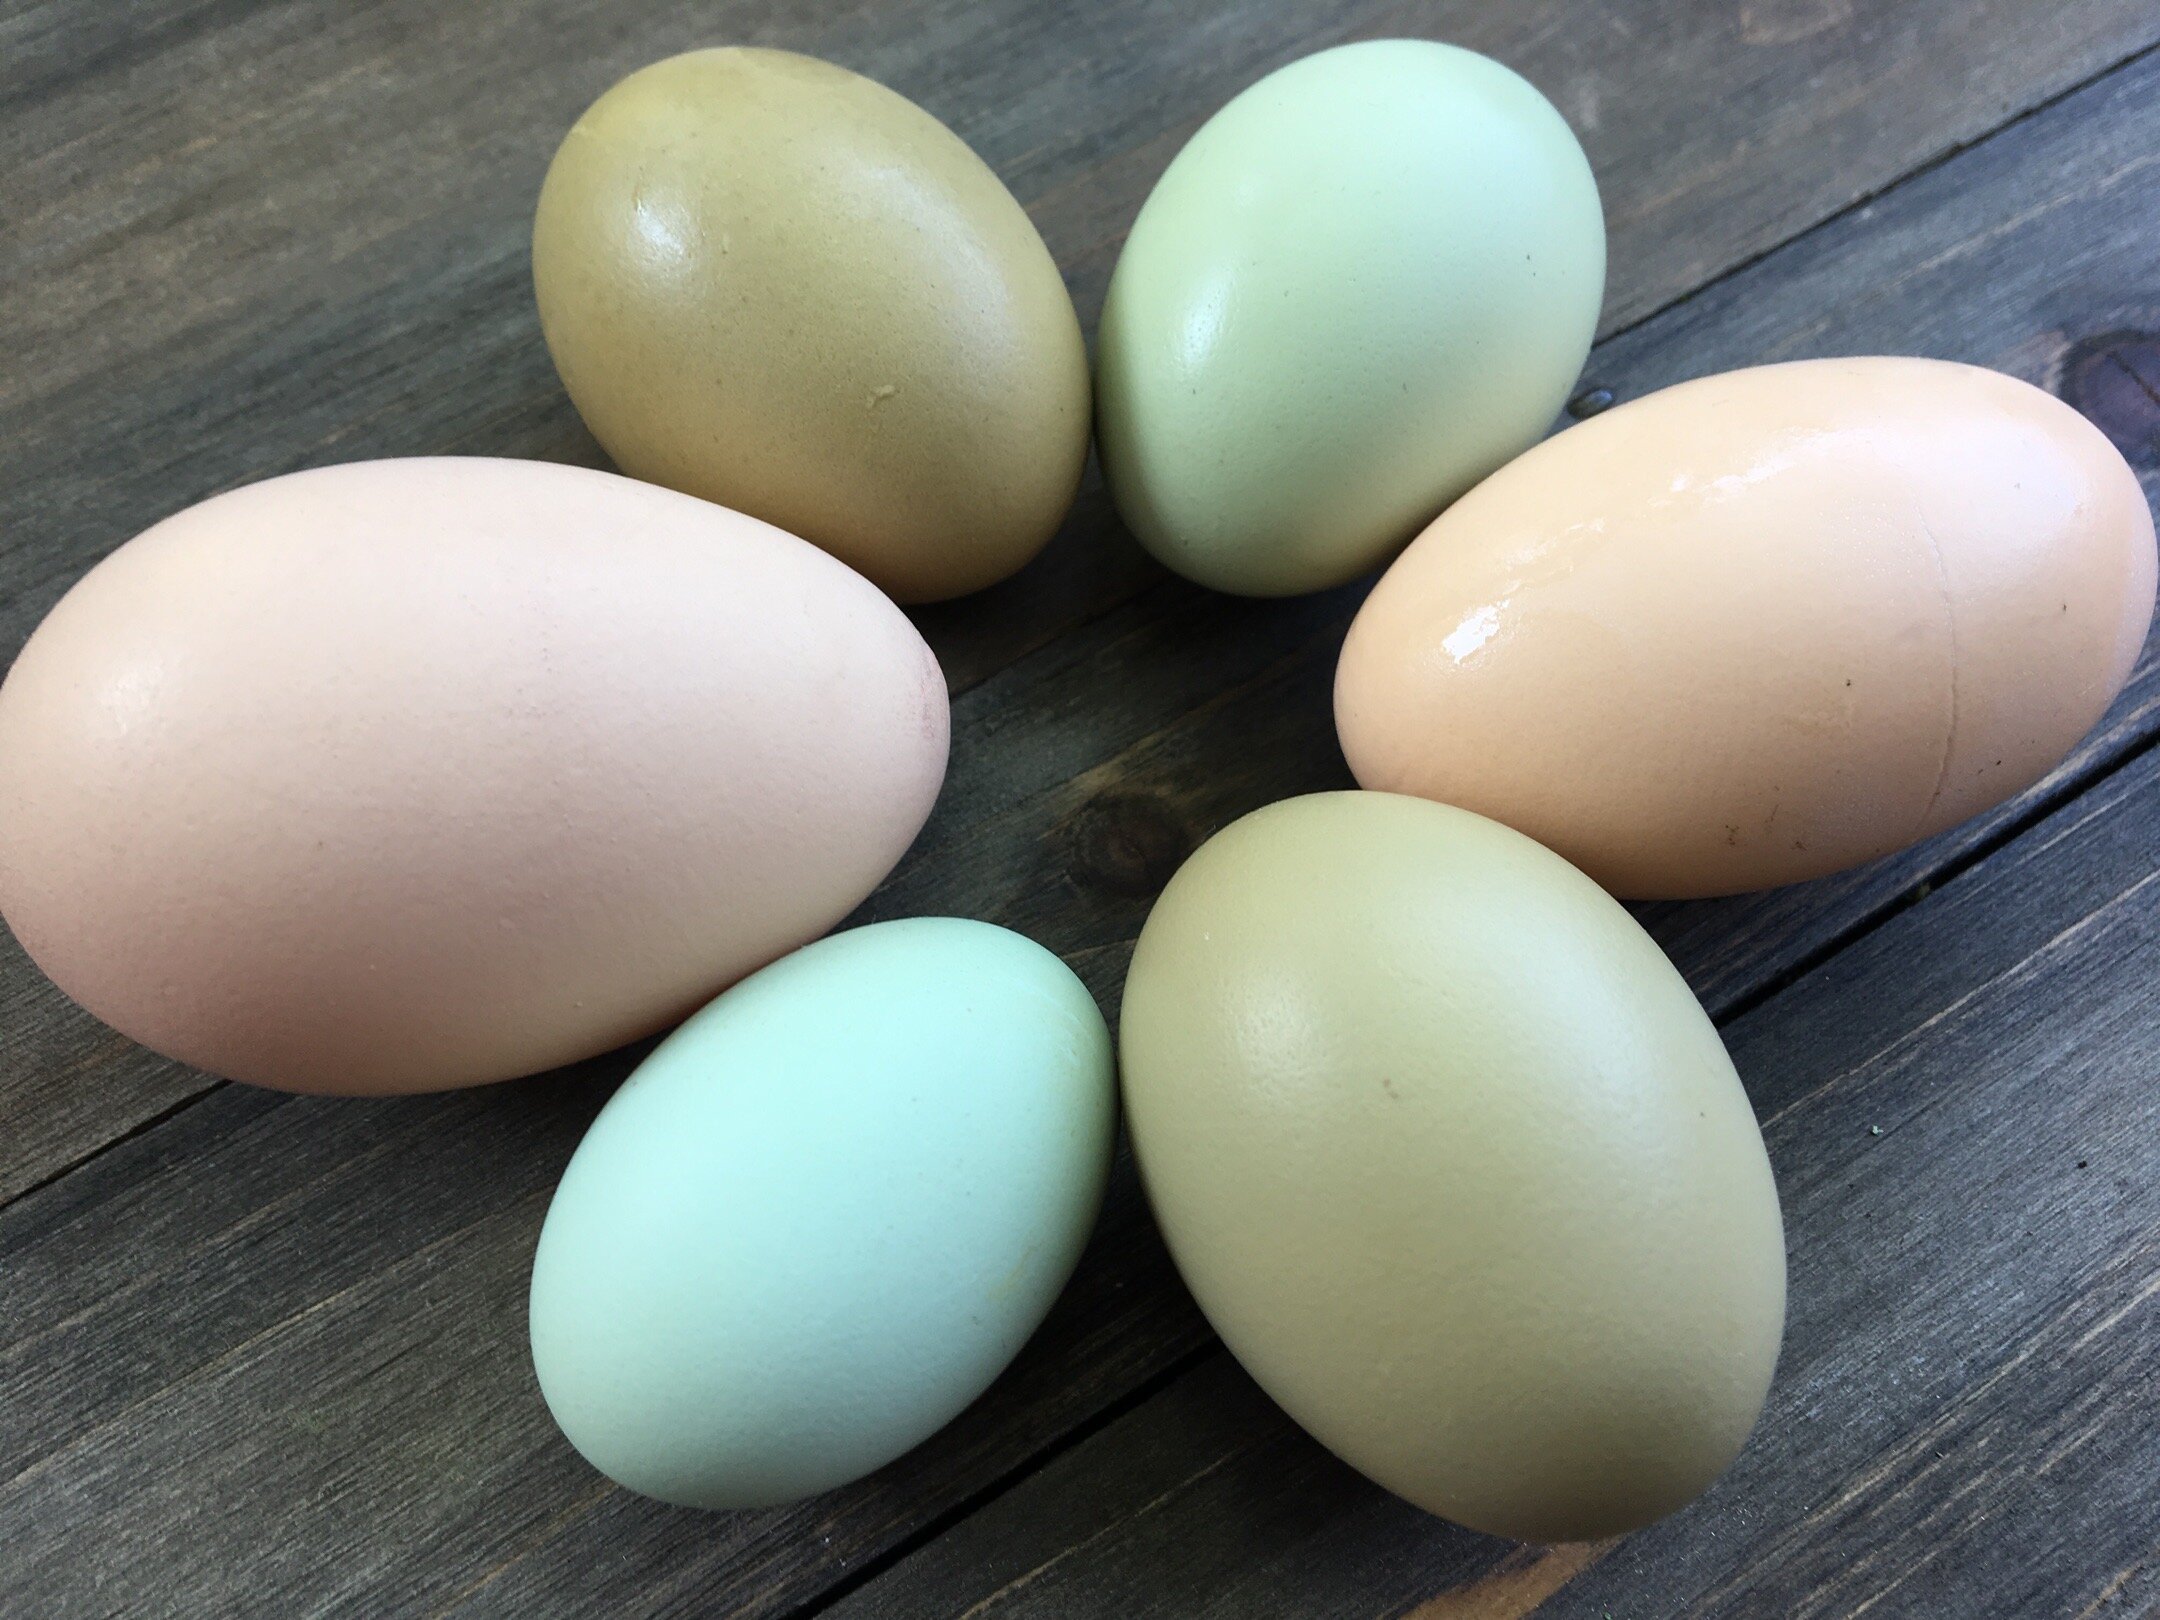 How to Wash Farm Fresh Eggs--Or is it Better Not To? — Golden